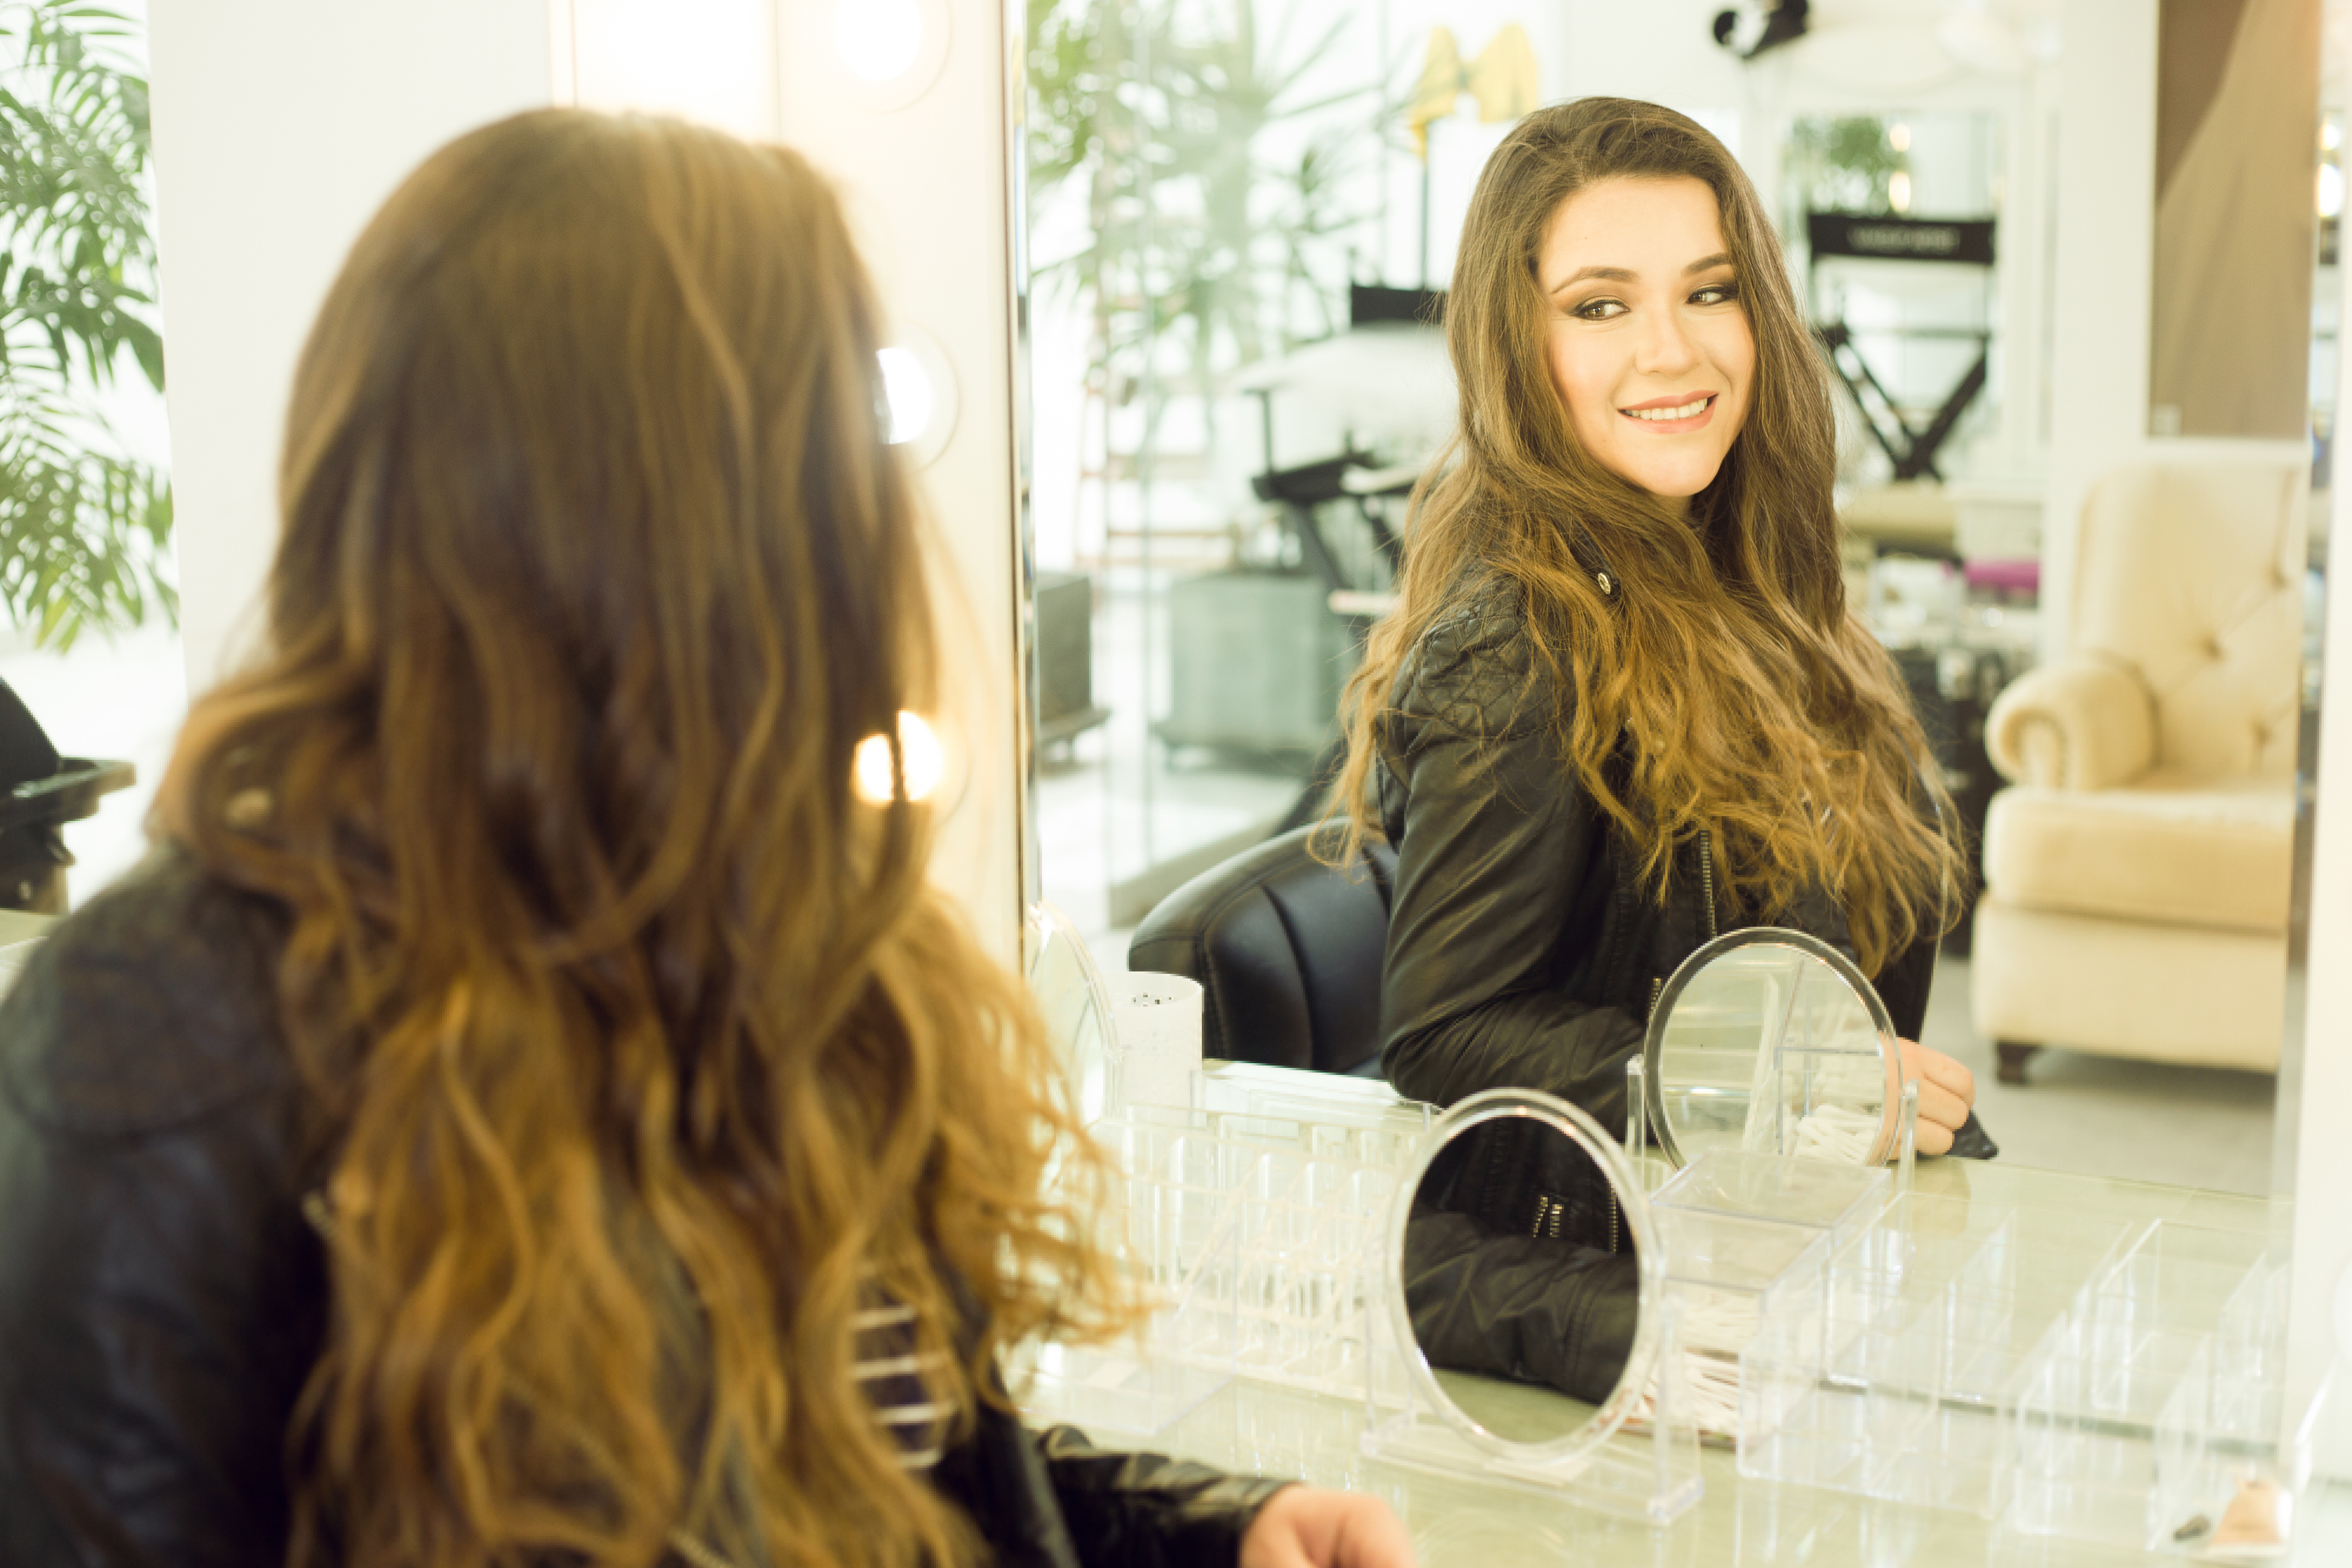 A woman looking and smiling at herself in a mirror.